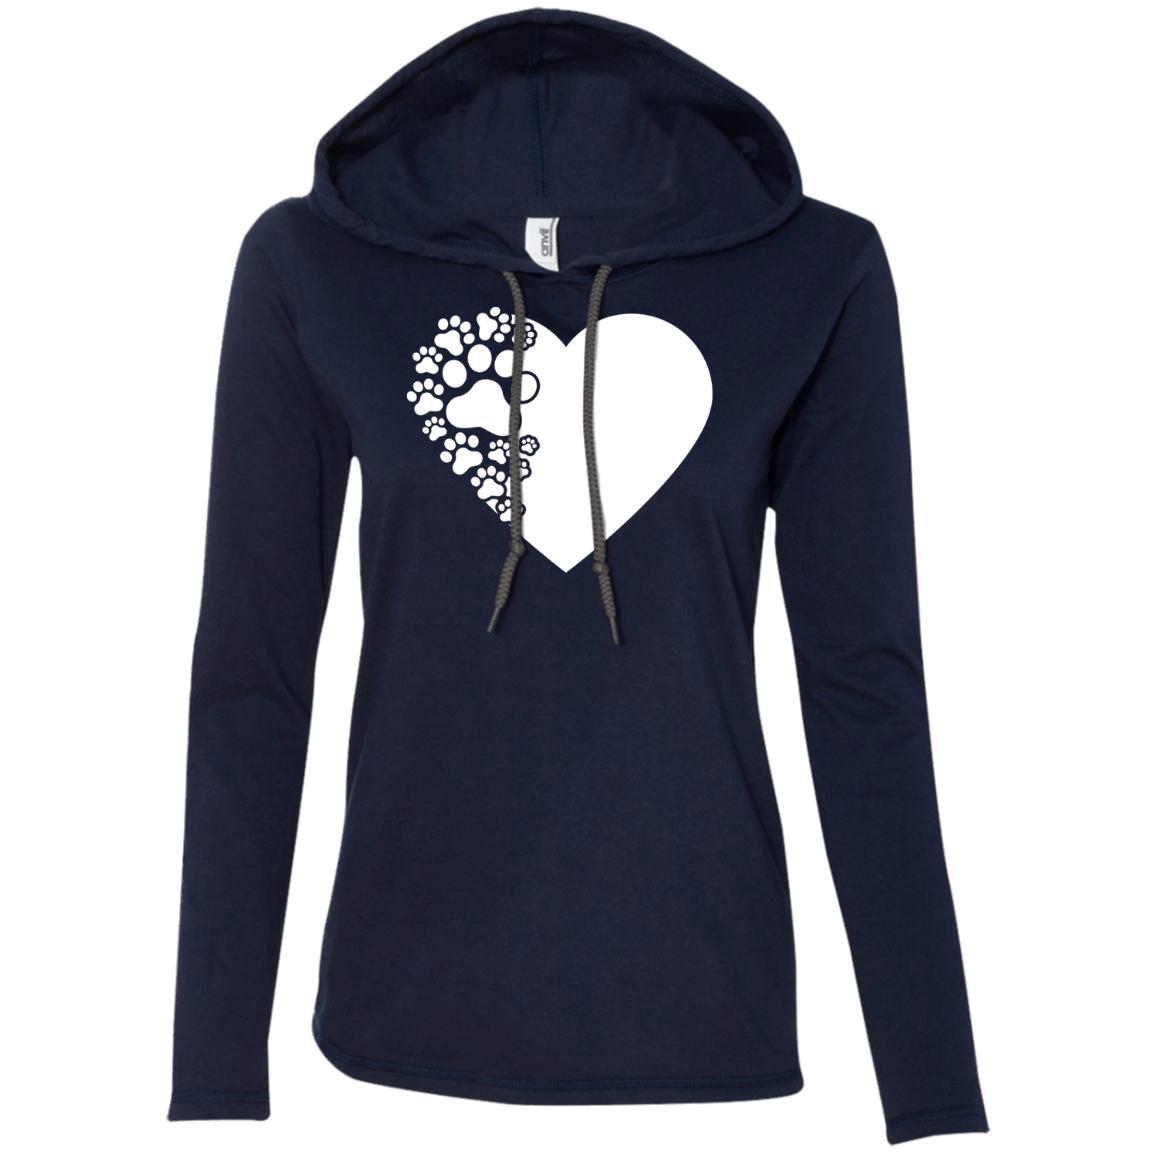 Dog Paw Print Hooded Shirt For Women – Oh my Glad